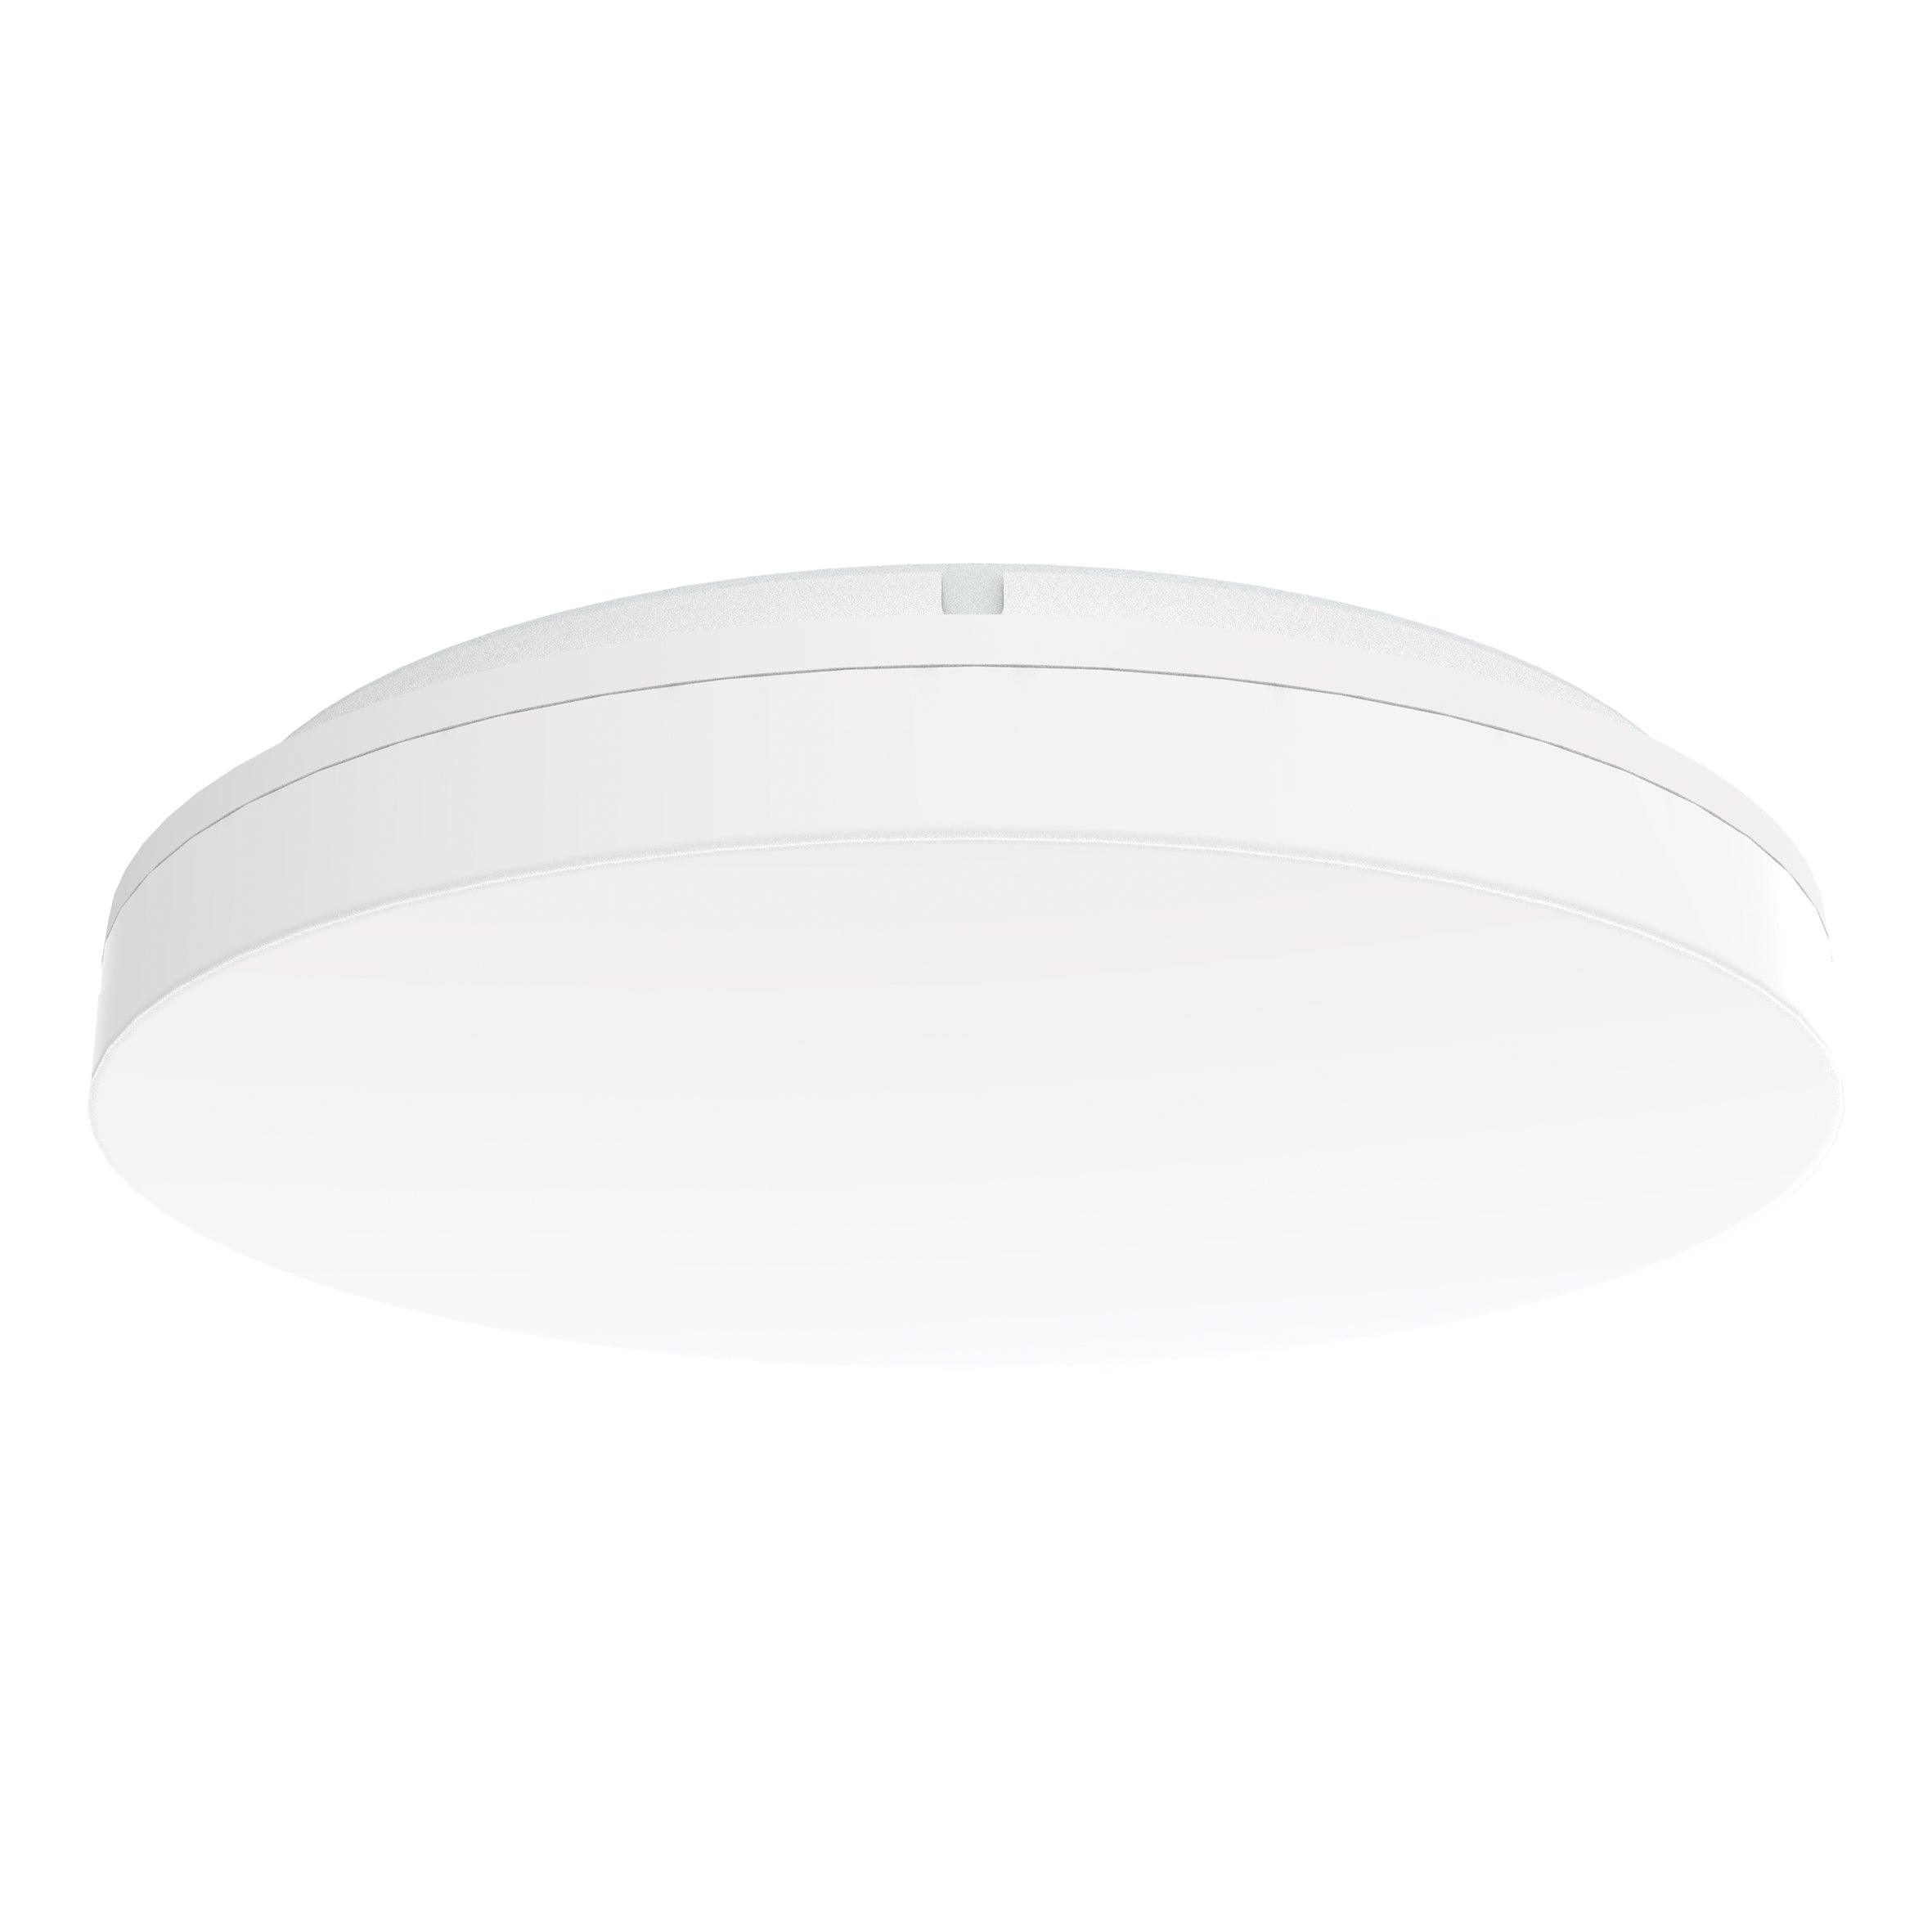 Domus Lighting Oyster Lights Round / 400mm / WHITE Sunset - 15W/25W/35W Colour Switchable Led Ceiling Light Ip54 240V - Trio Lights-For-You 20882